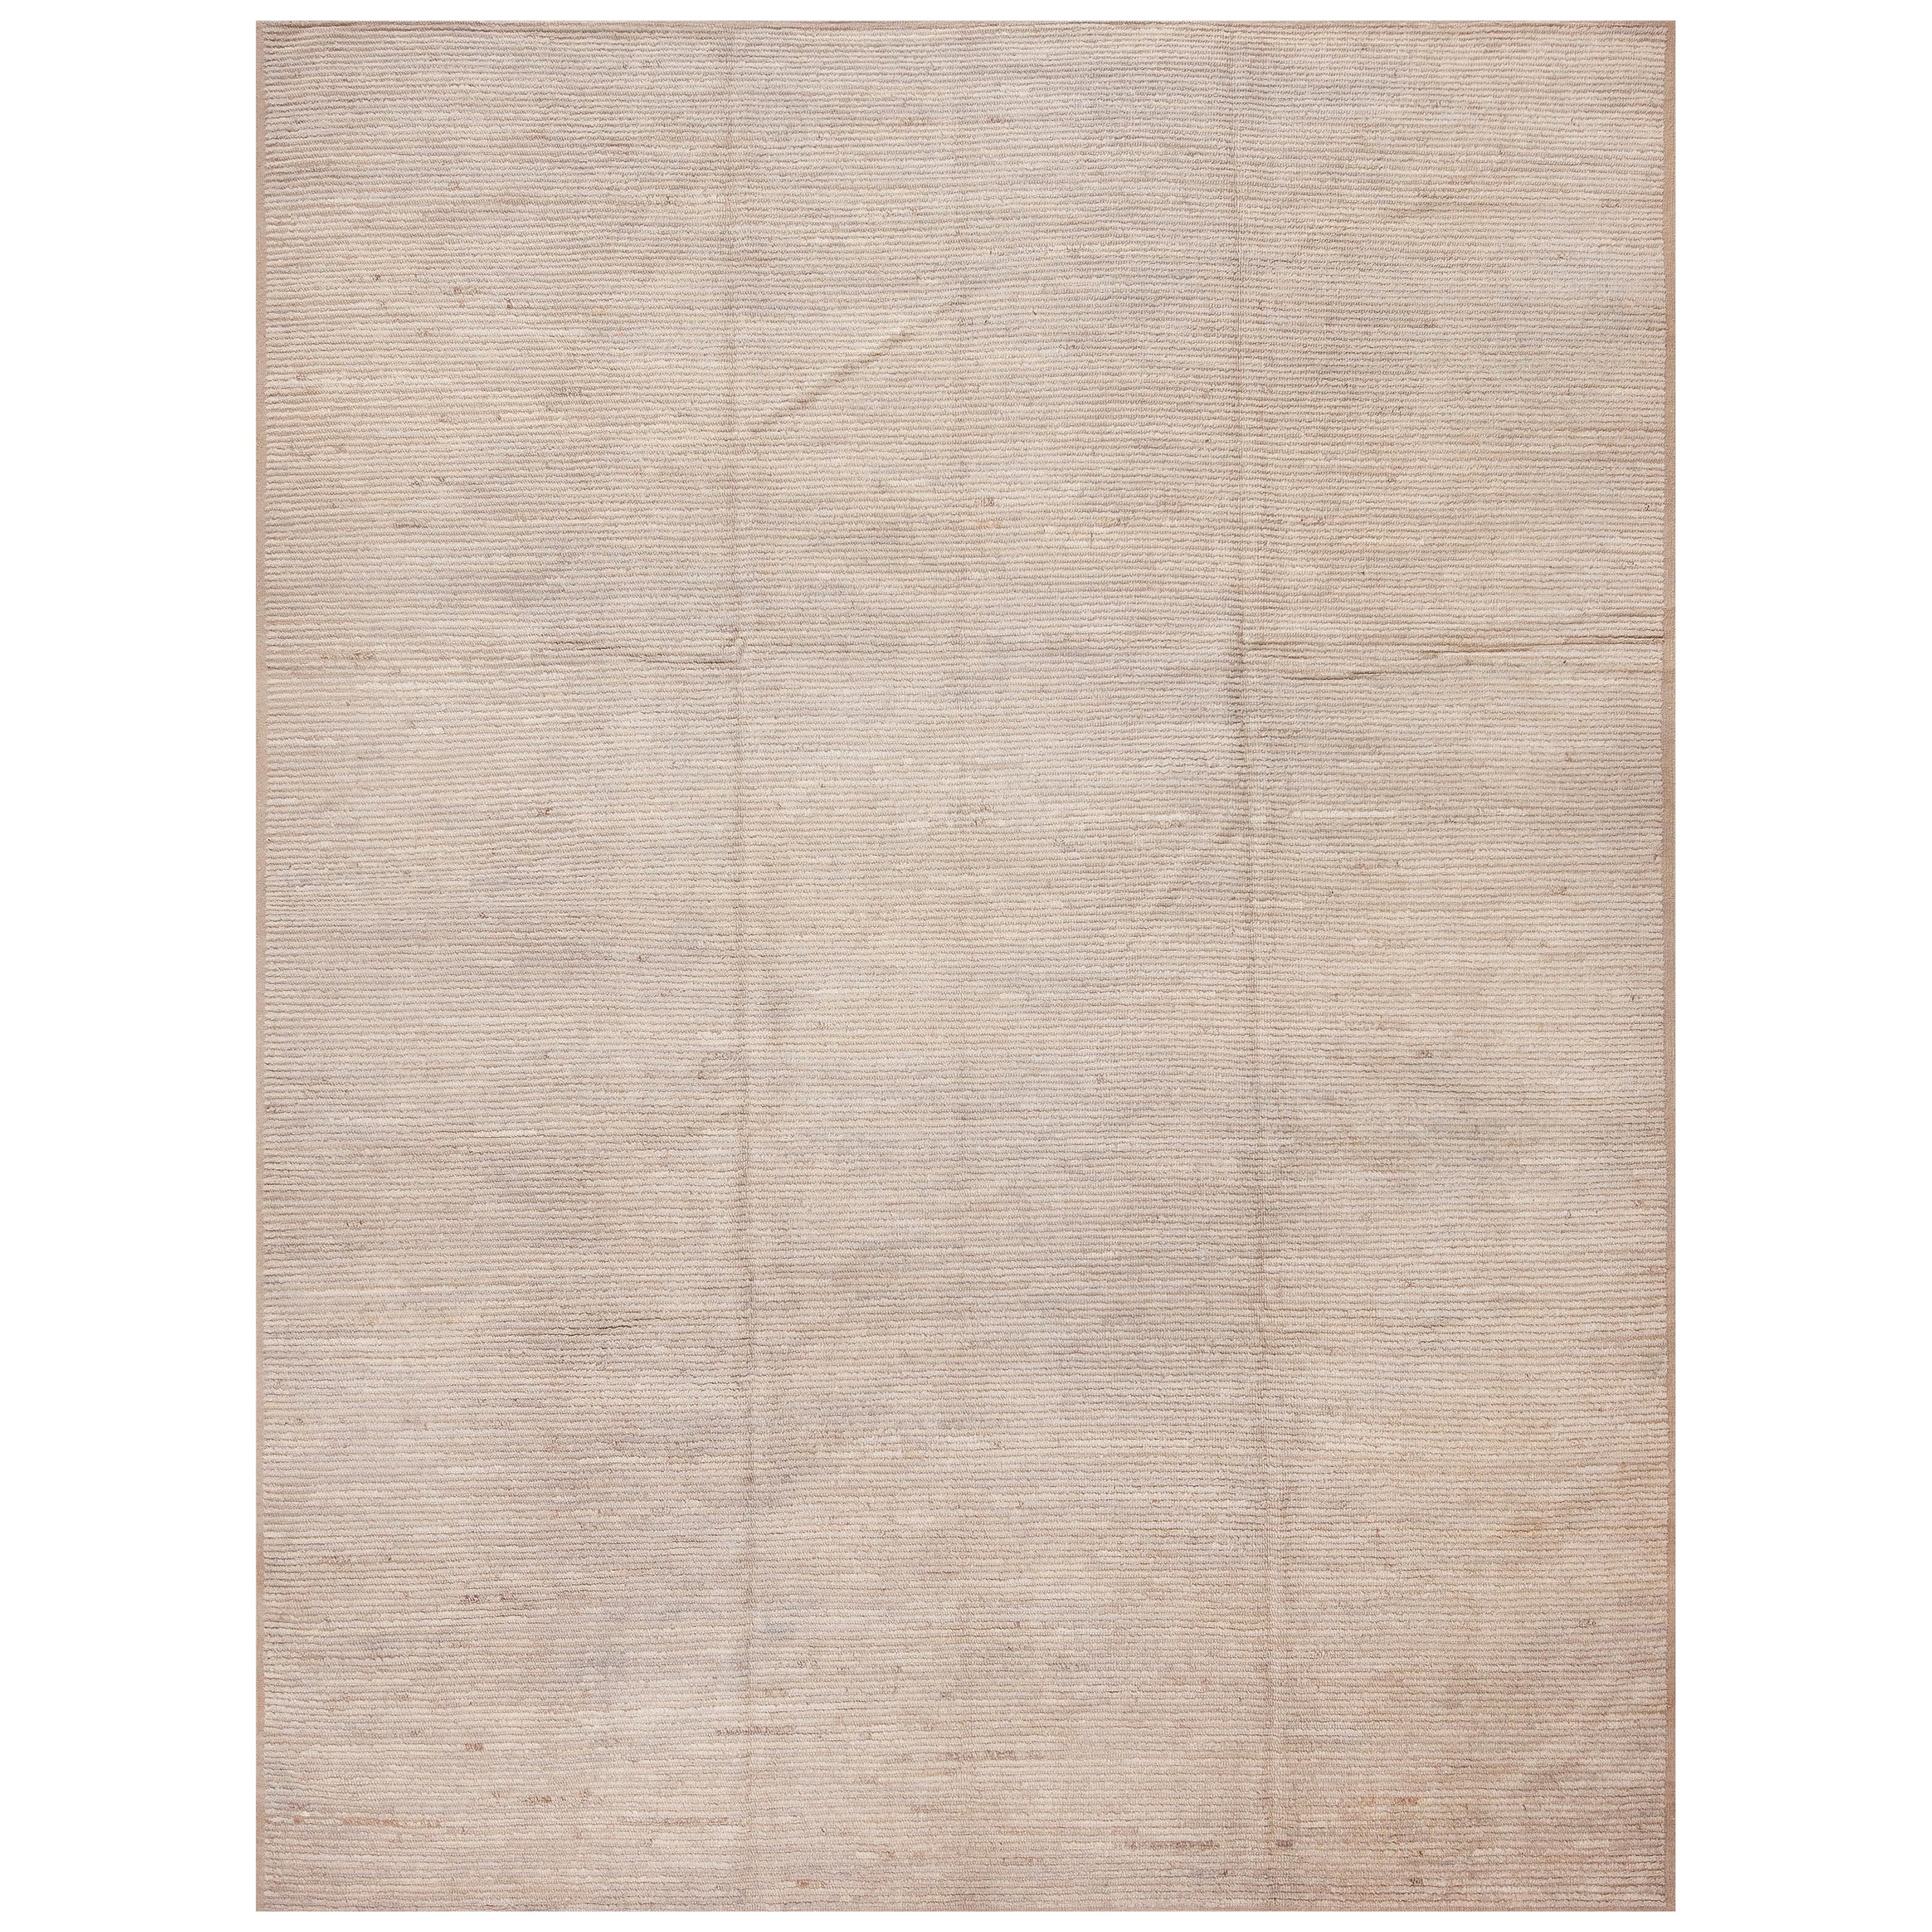 Nazmiyal Collection Elegant Solid Abstract Cream Color Modern Rug 8'11" x 12' For Sale